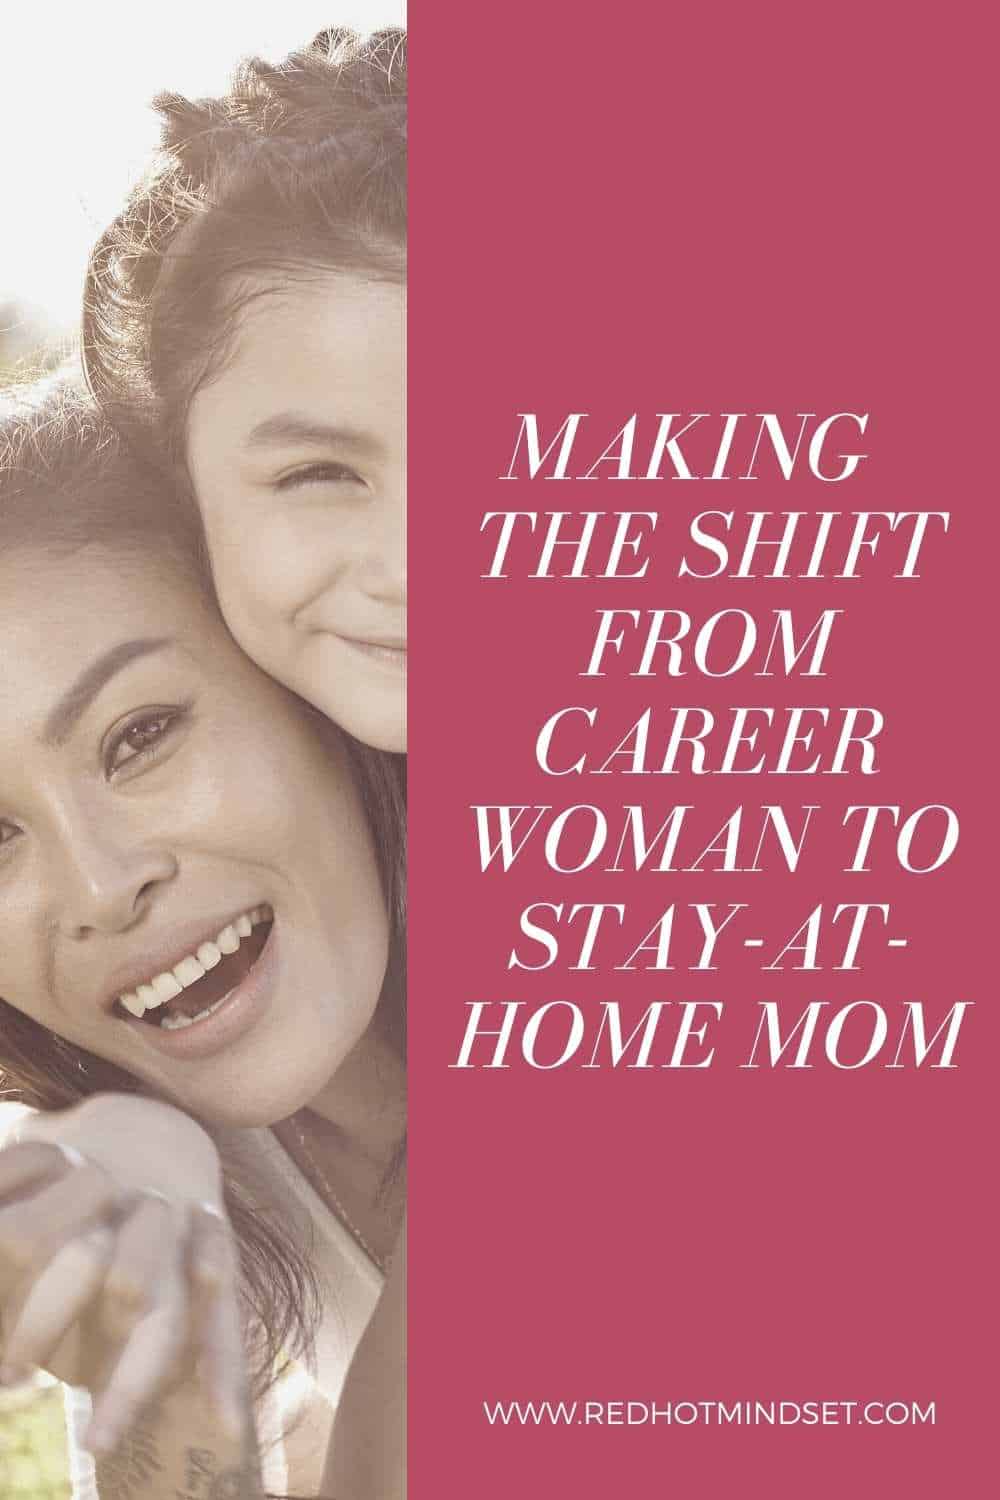 Shifting from Career Woman to Stay-at-Home Mom – It’s Possible to Redefine Your Life